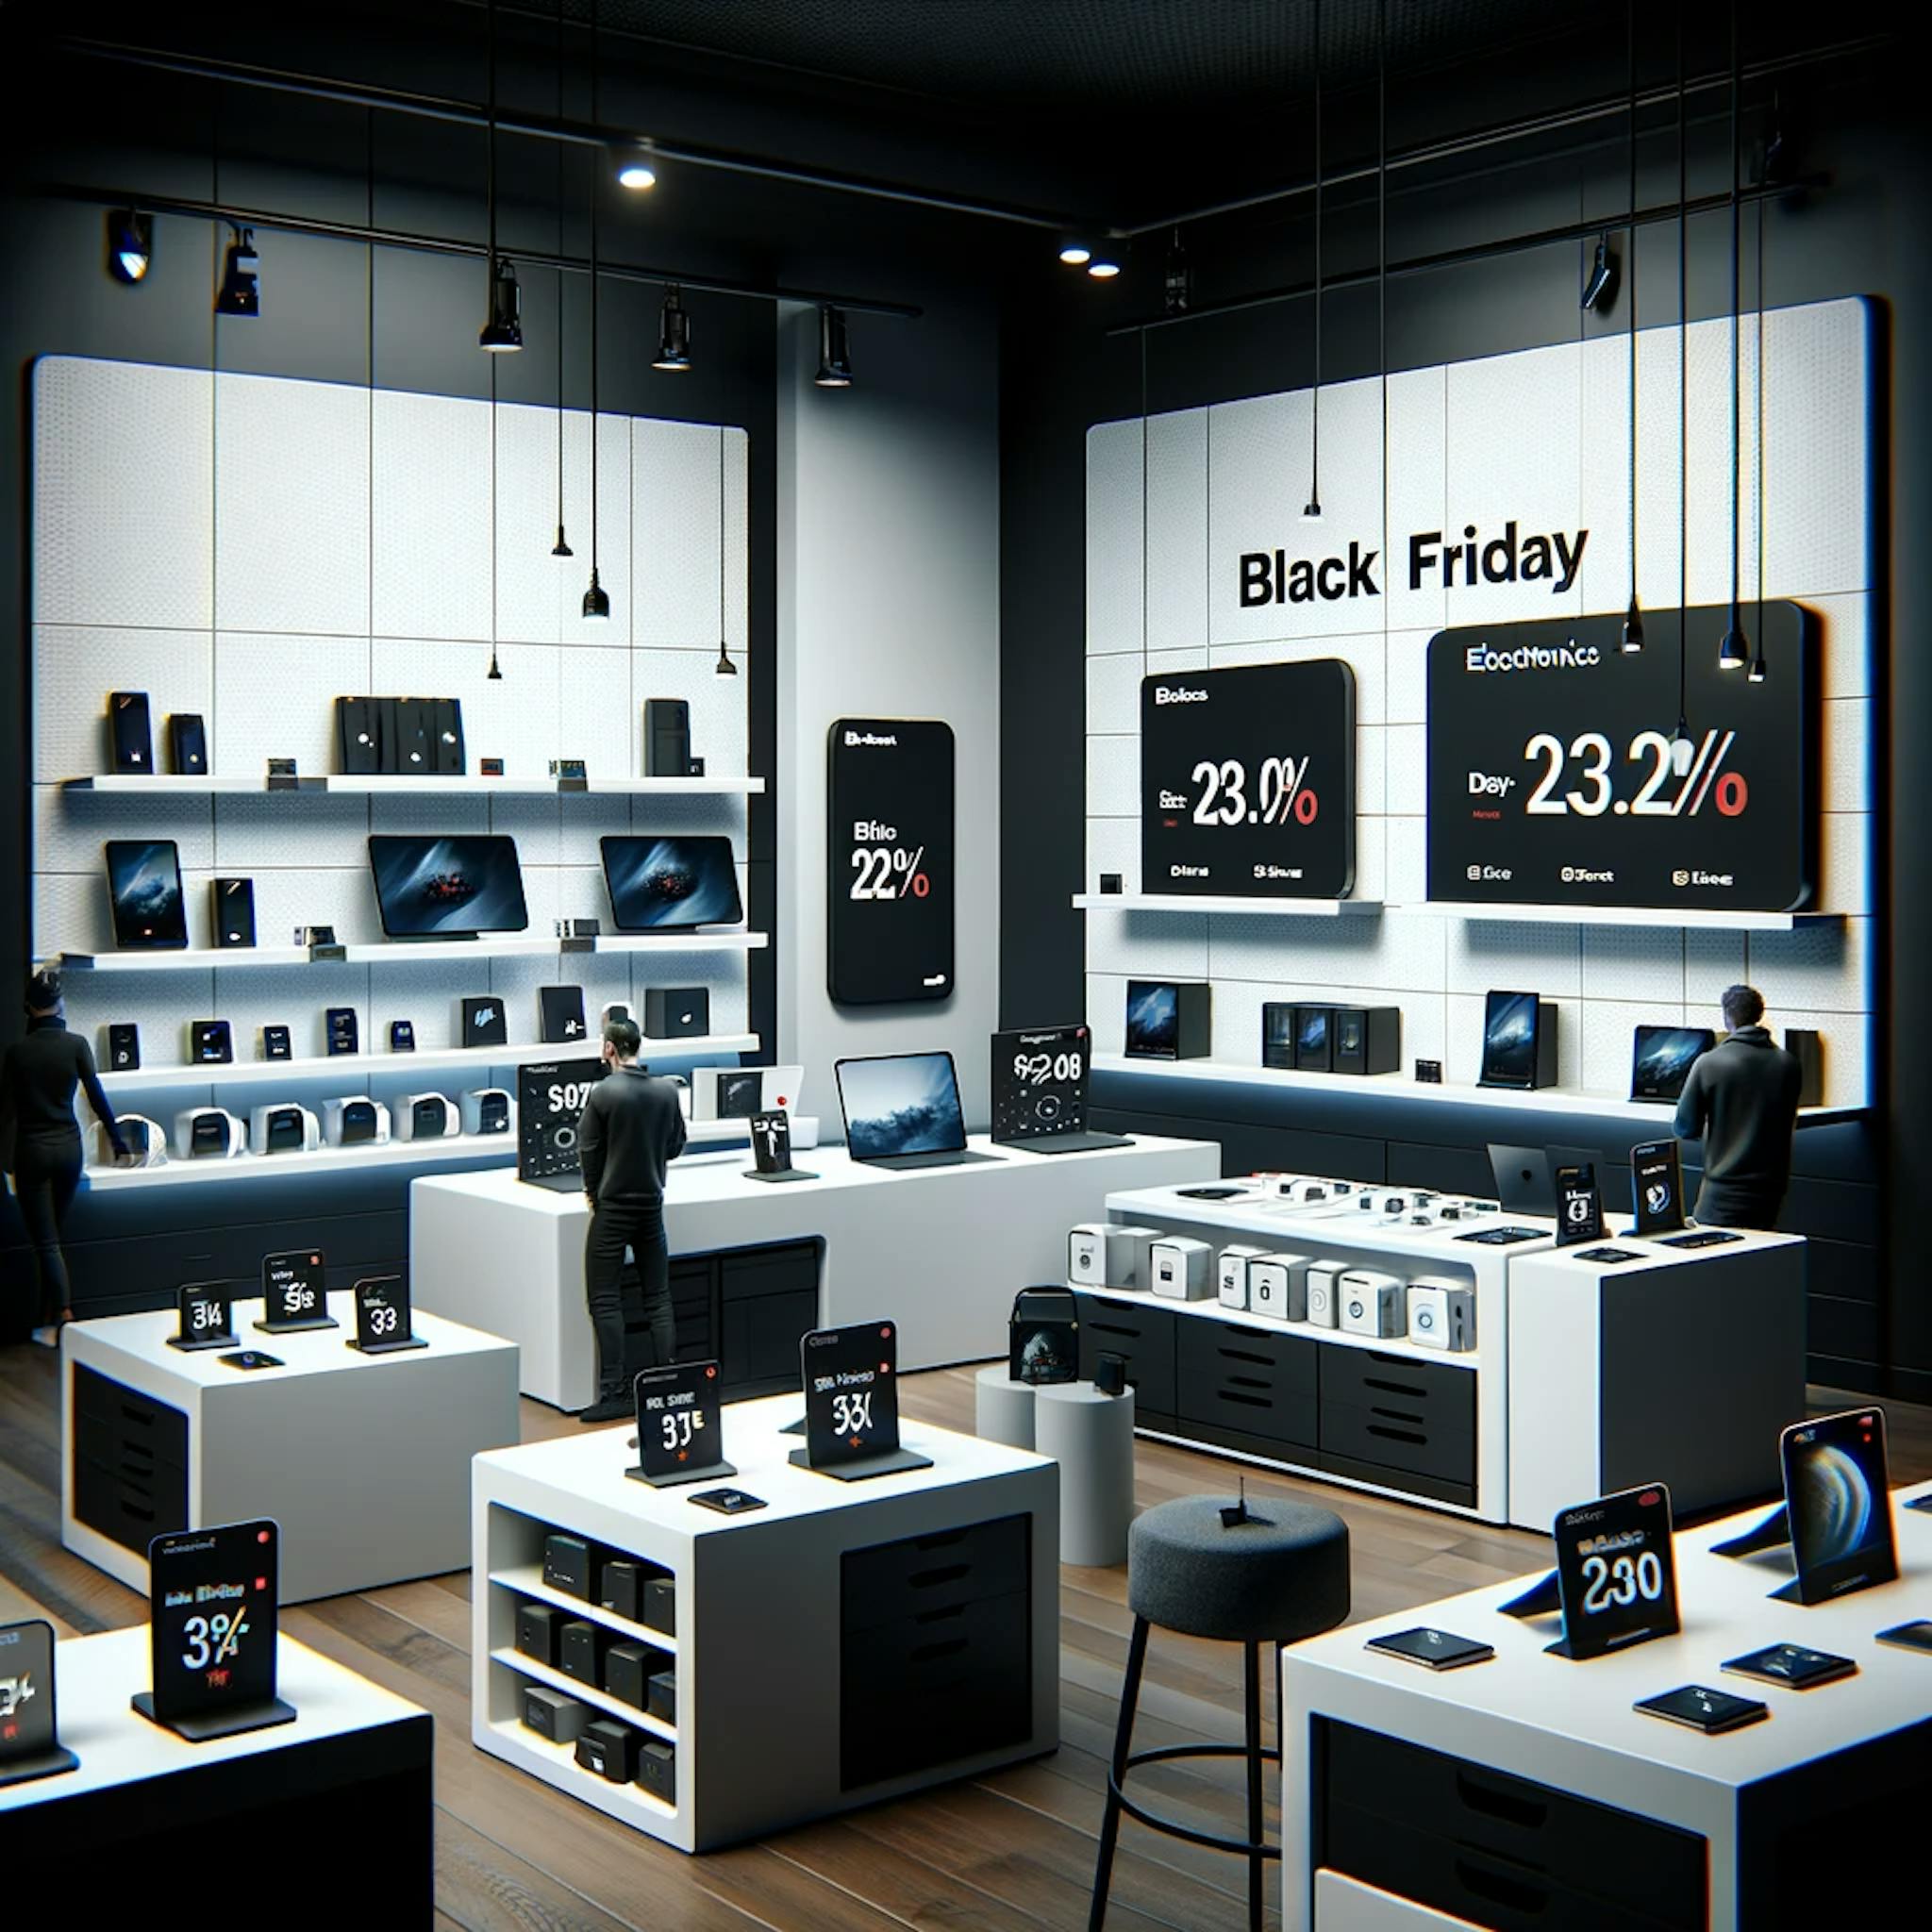 minimalist and realistic scene of Black Friday deals and sales on electronics in a modern store setting